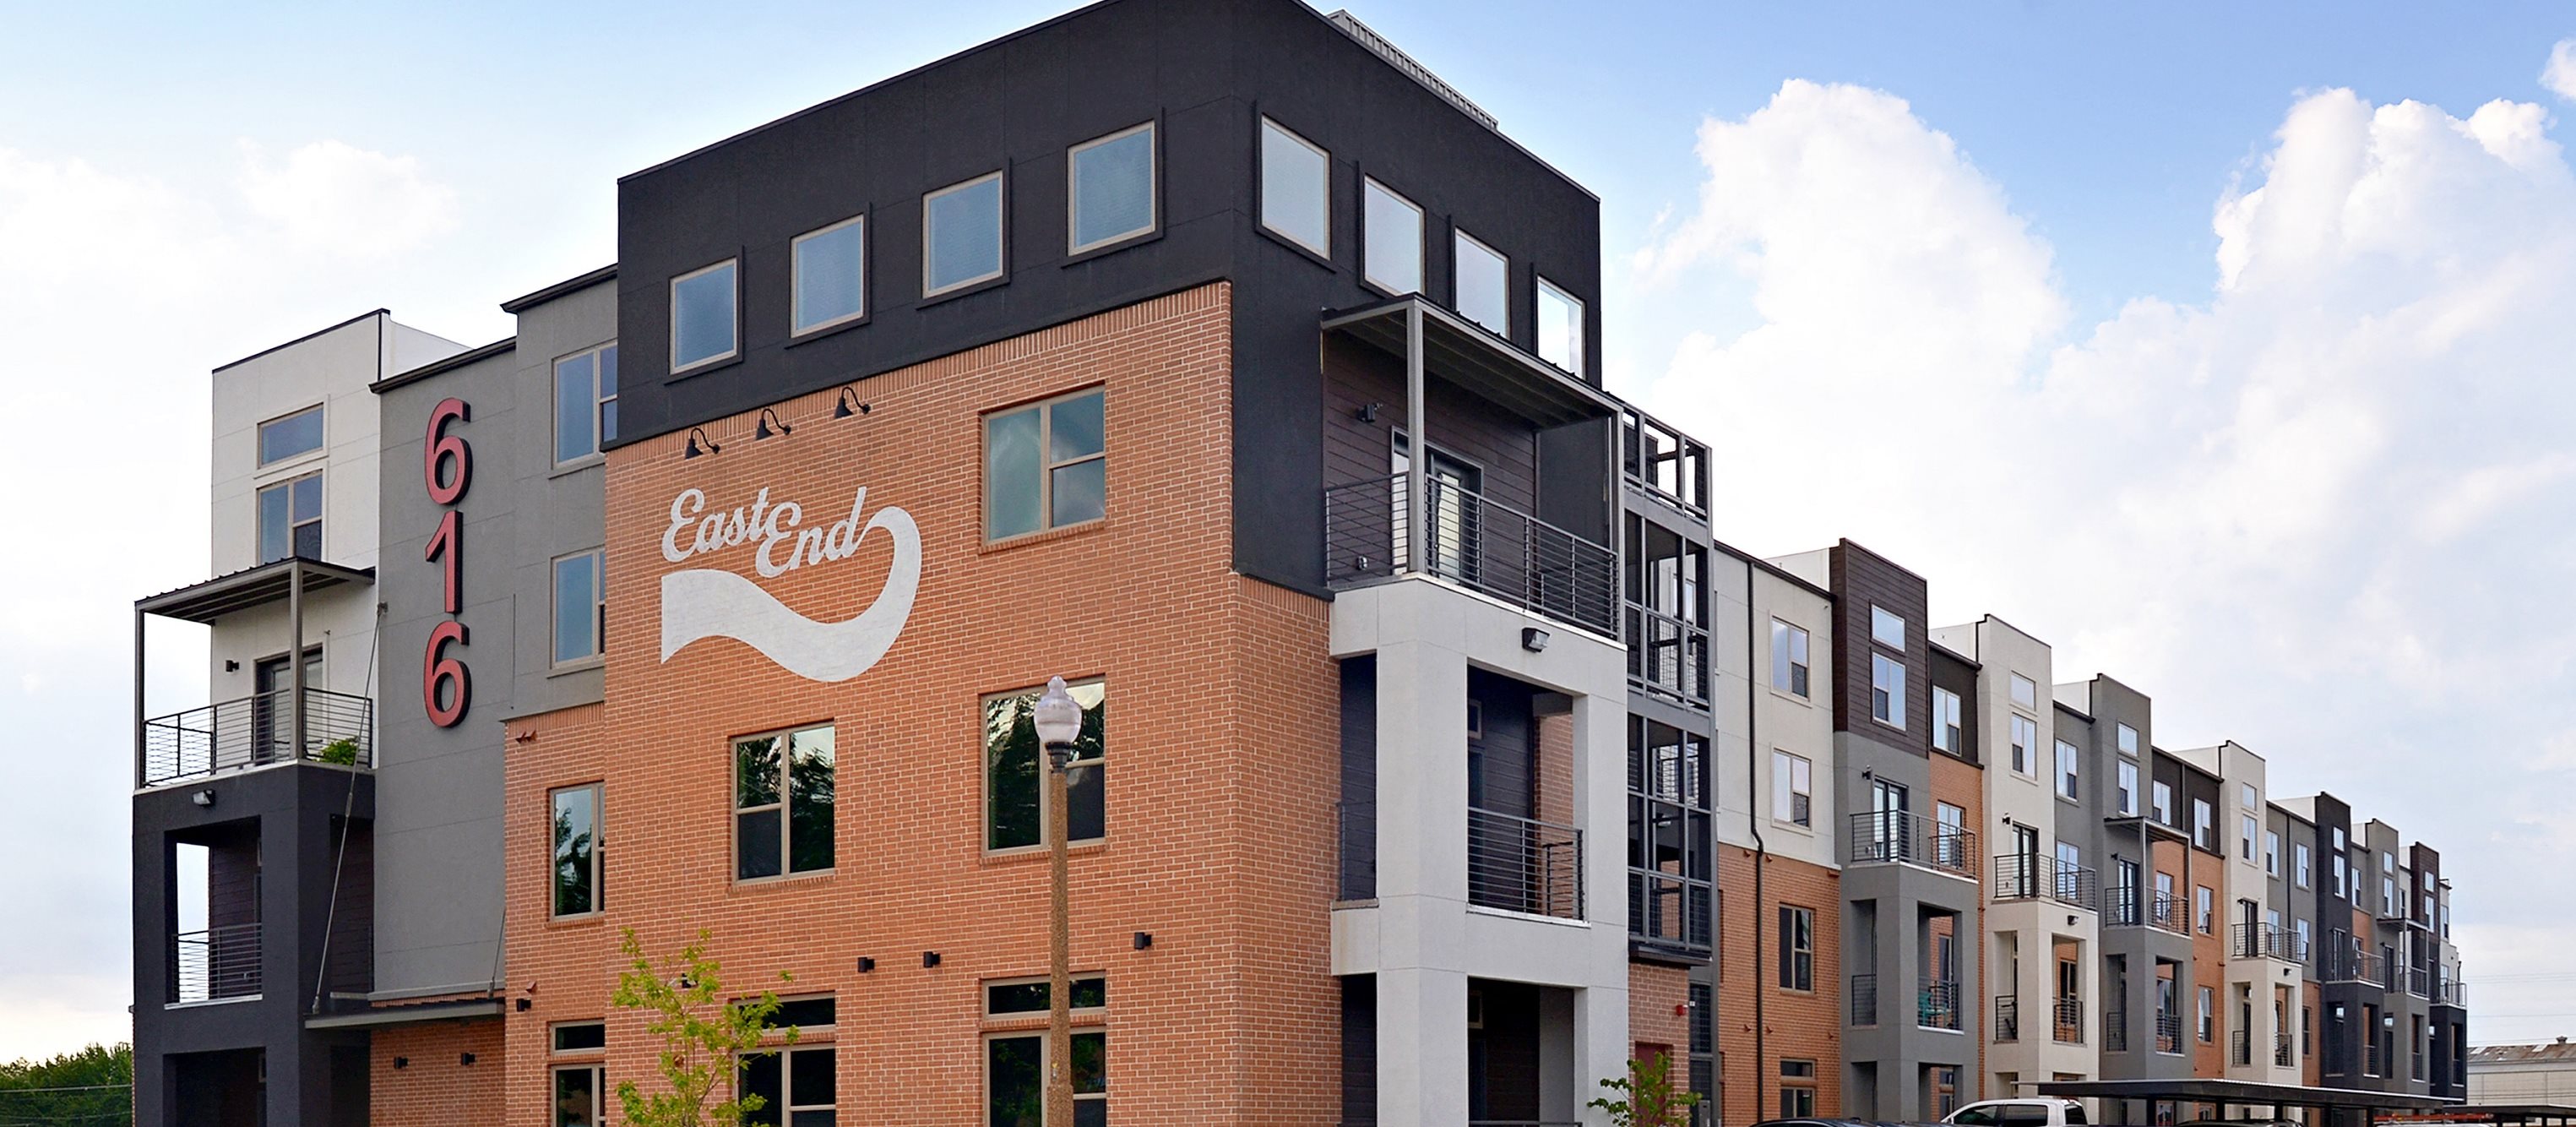 East End Lofts At The Railyard Apartments In Denton Tx [ 1334 x 3050 Pixel ]